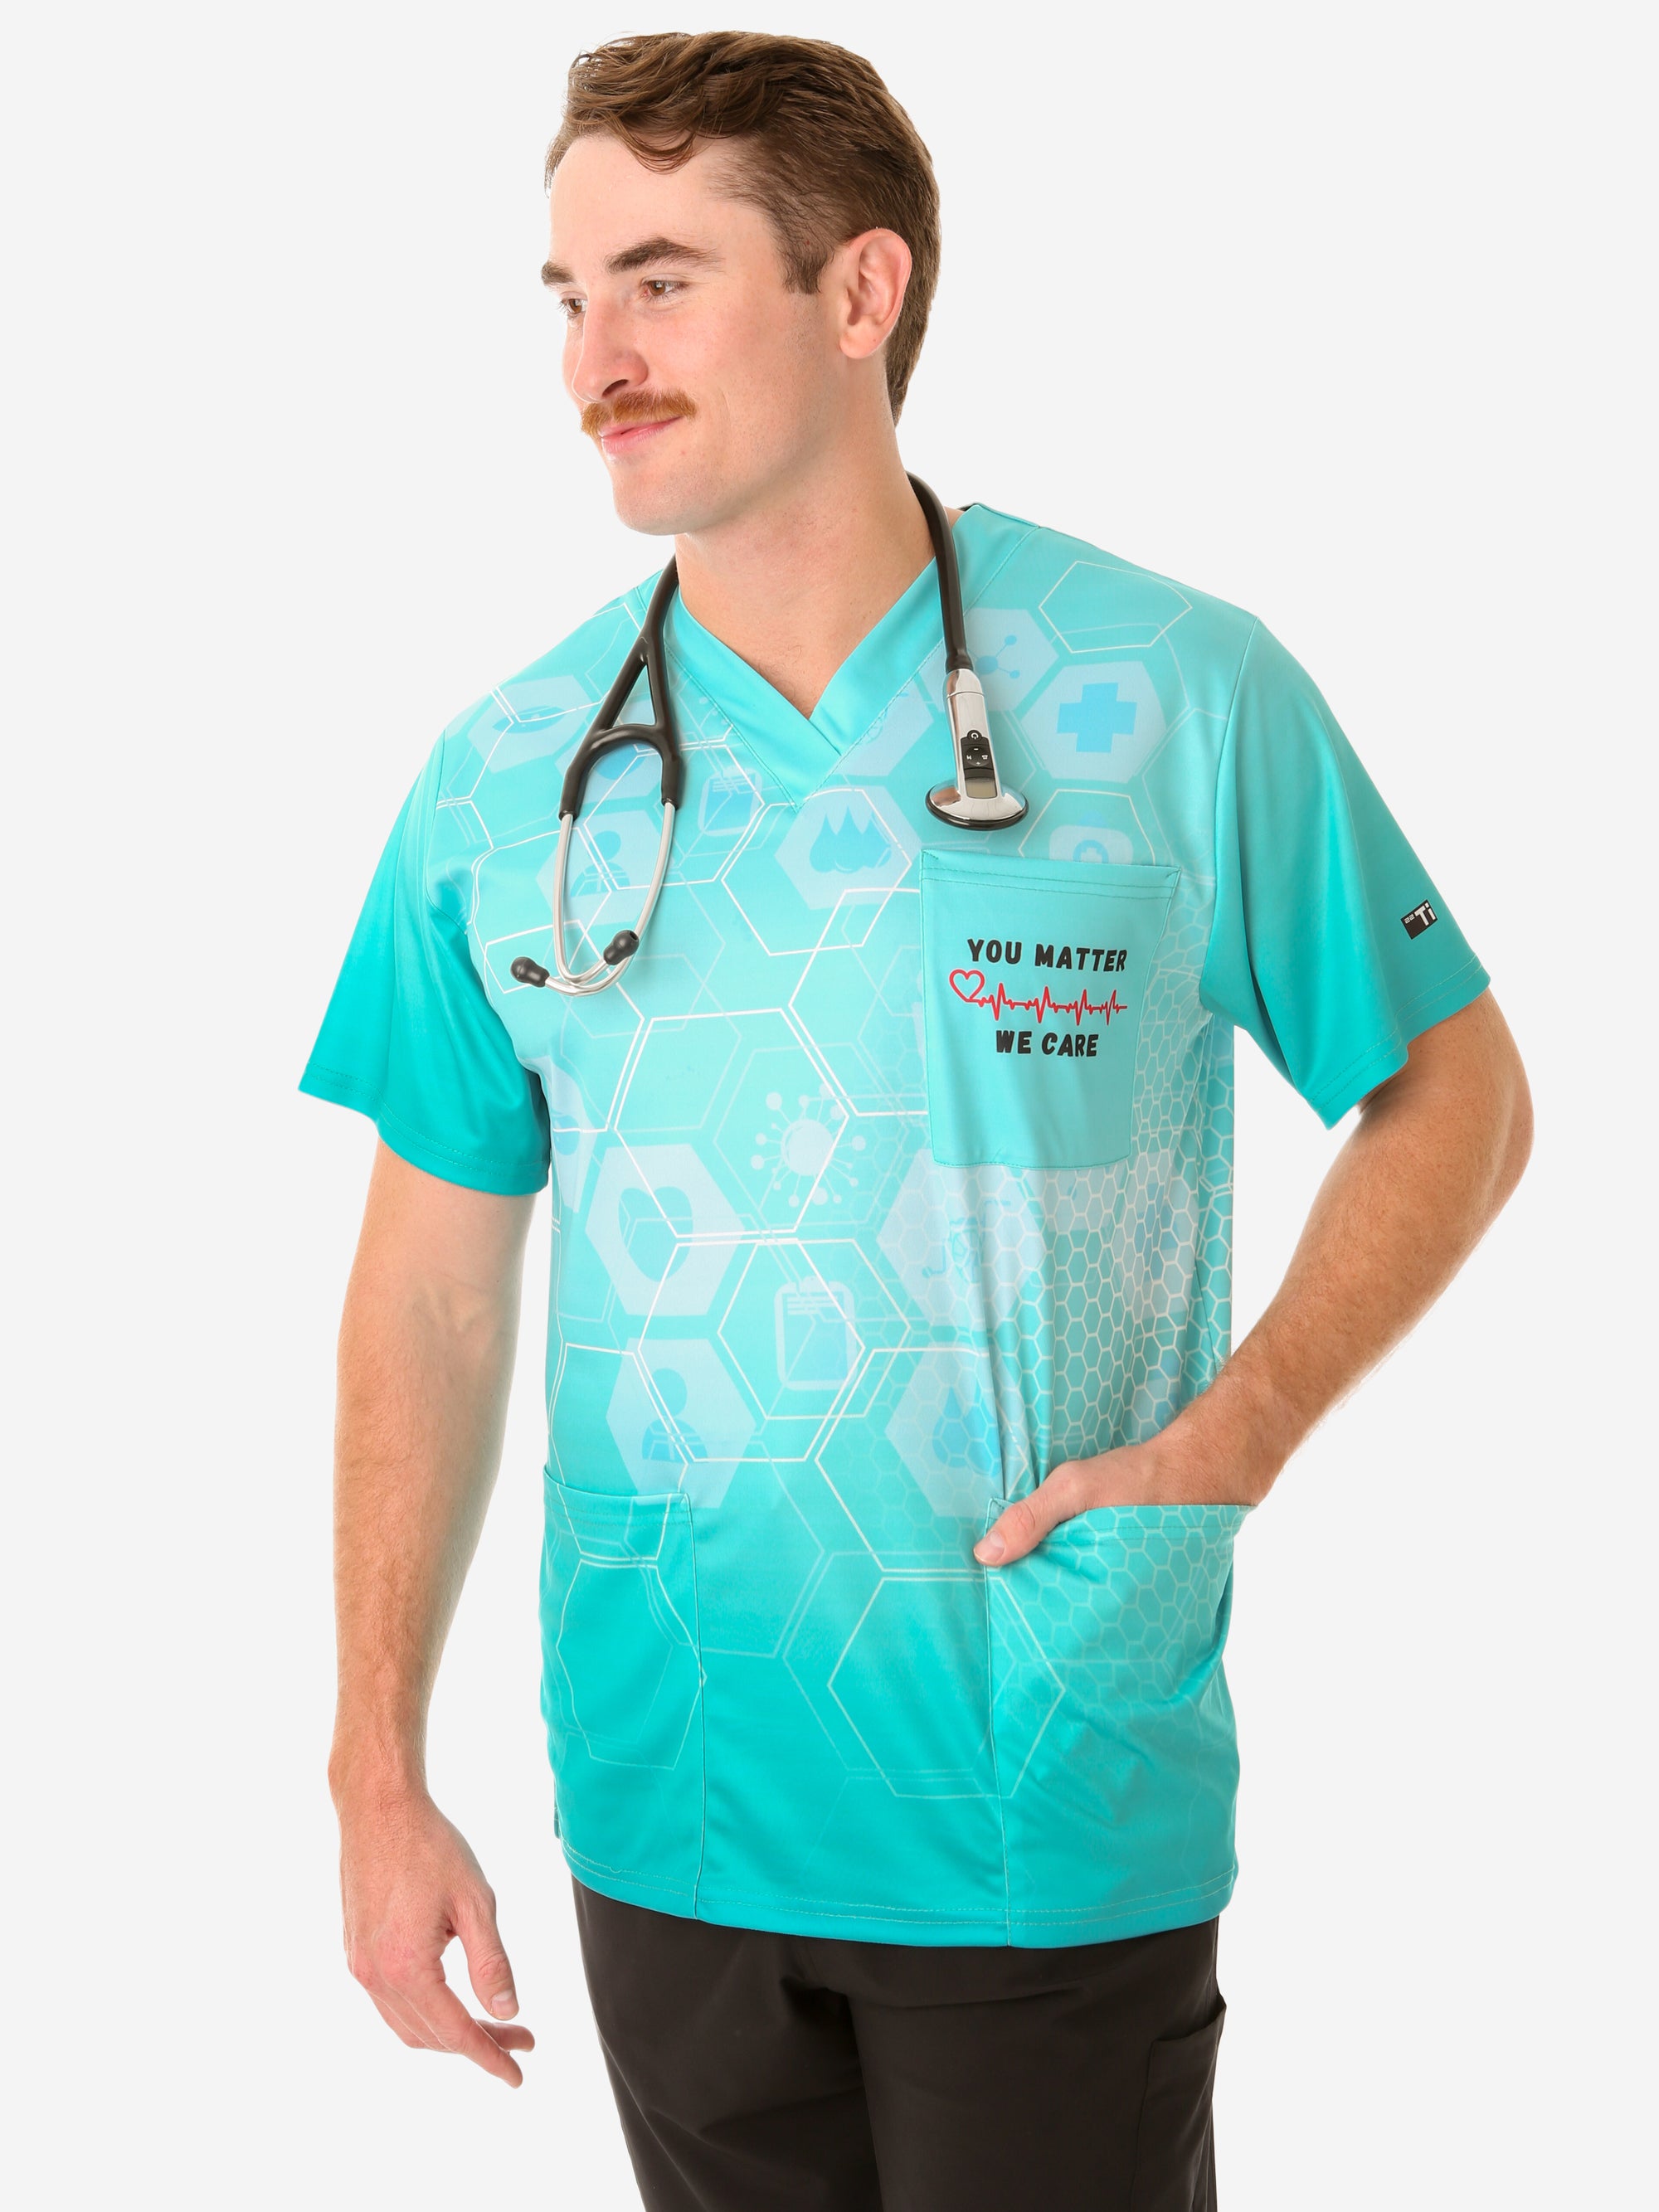 Men&#39;s The University of Kansas Health System Scrub Top Design Contest Winner You Matter We Care Top Only Front View Looking to Side